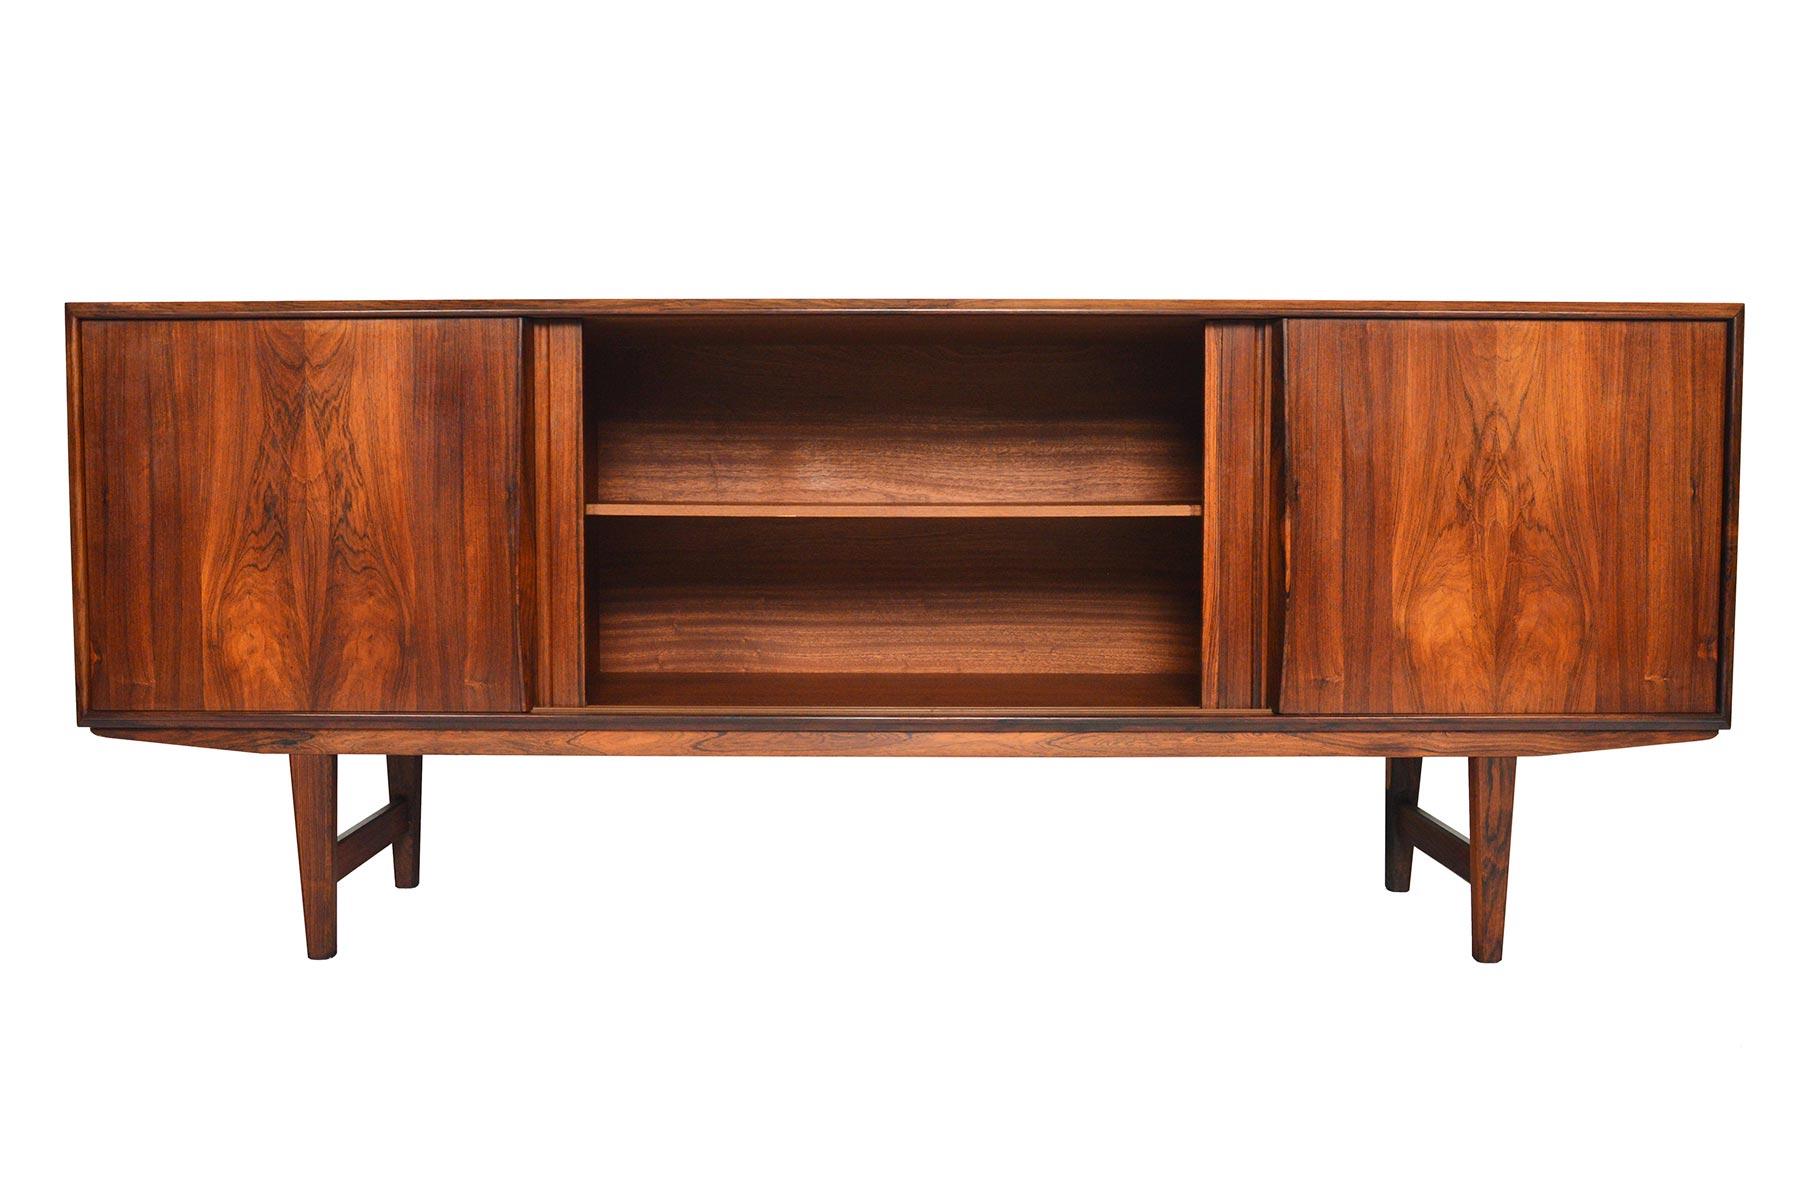 Beautifully simple and effortlessly modern, this Danish modern credenza in rosewood was designed by E.W. Bach for Sejling Furniture Company in the 1960s. Four sliding doors with grooved pulls open to reveal three bays with adjustable shelving. The